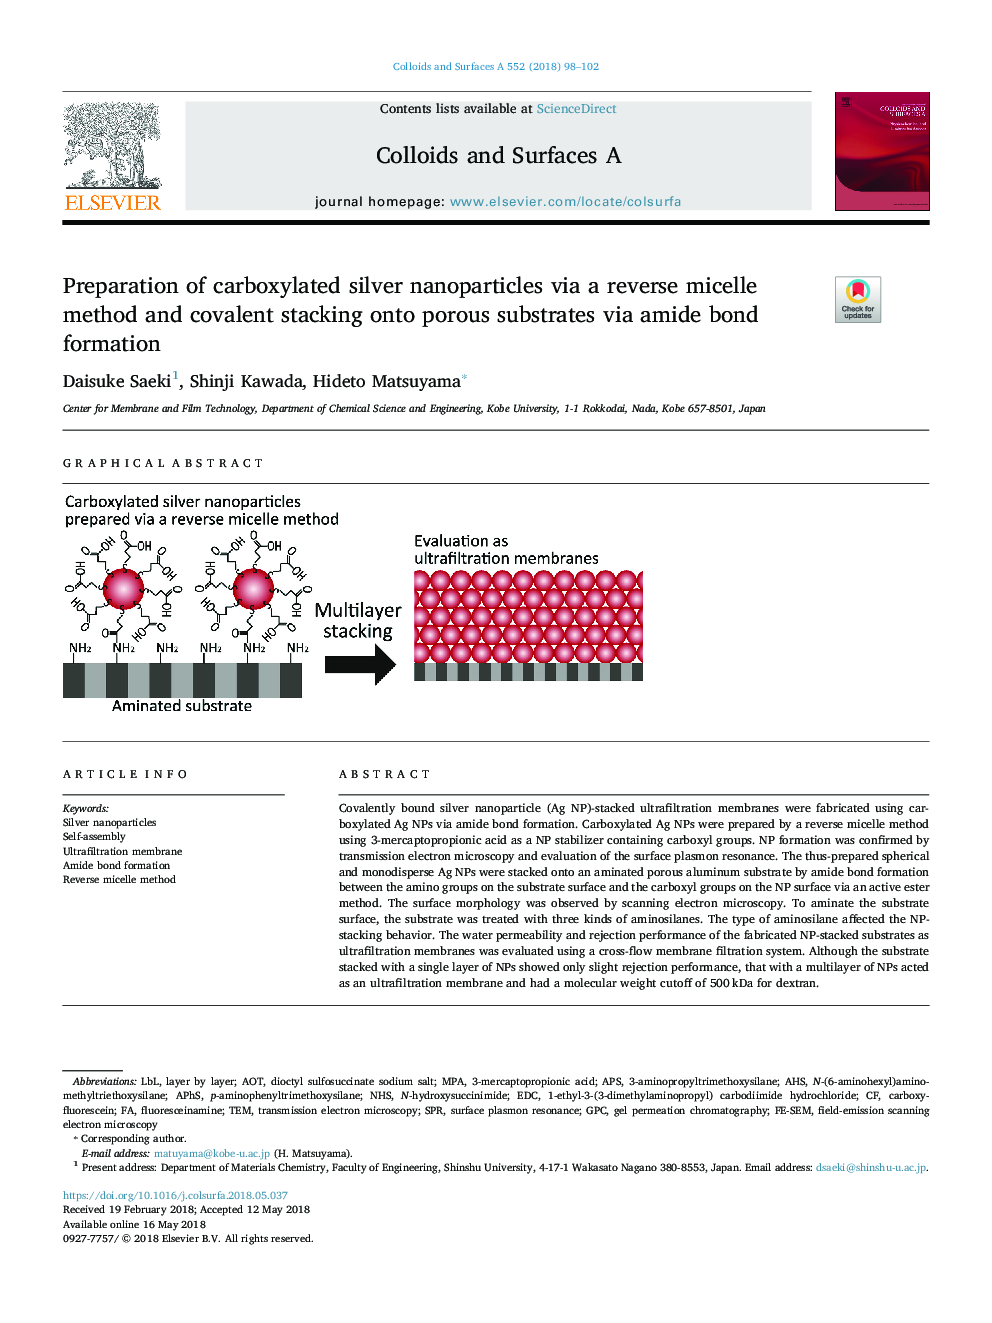 Preparation of carboxylated silver nanoparticles via a reverse micelle method and covalent stacking onto porous substrates via amide bond formation